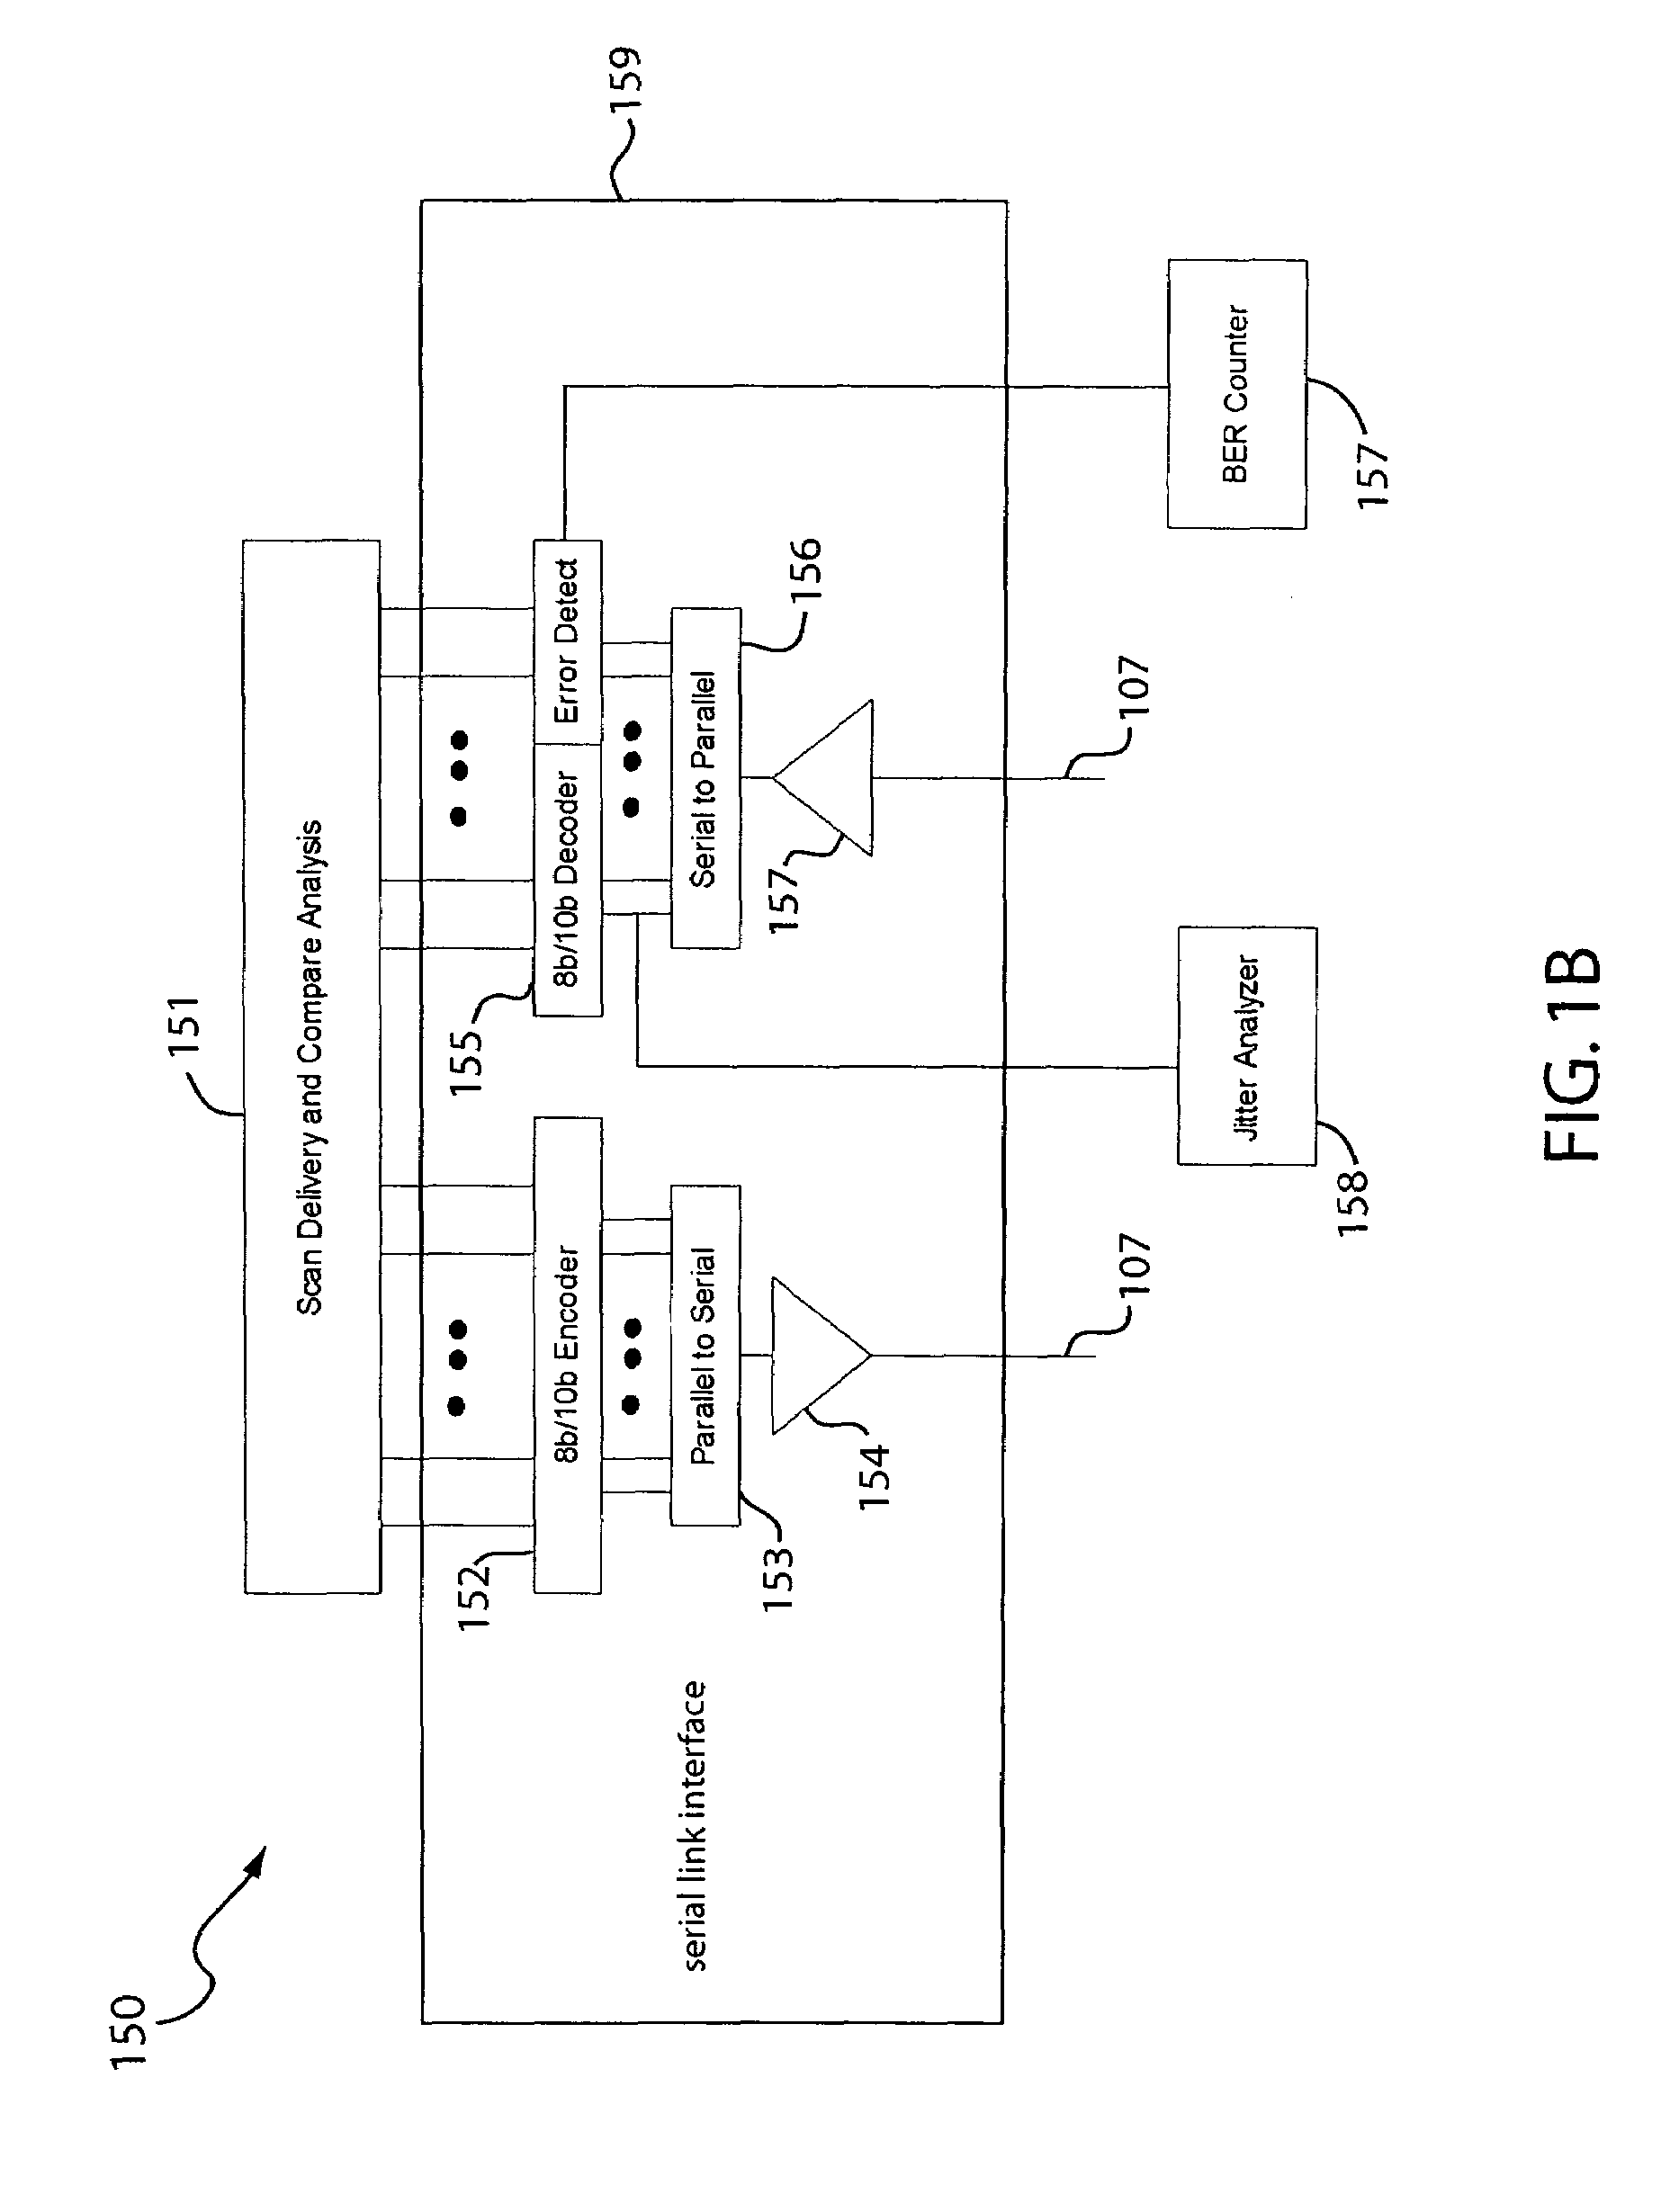 Scan testing of integrated circuits with high-speed serial interface